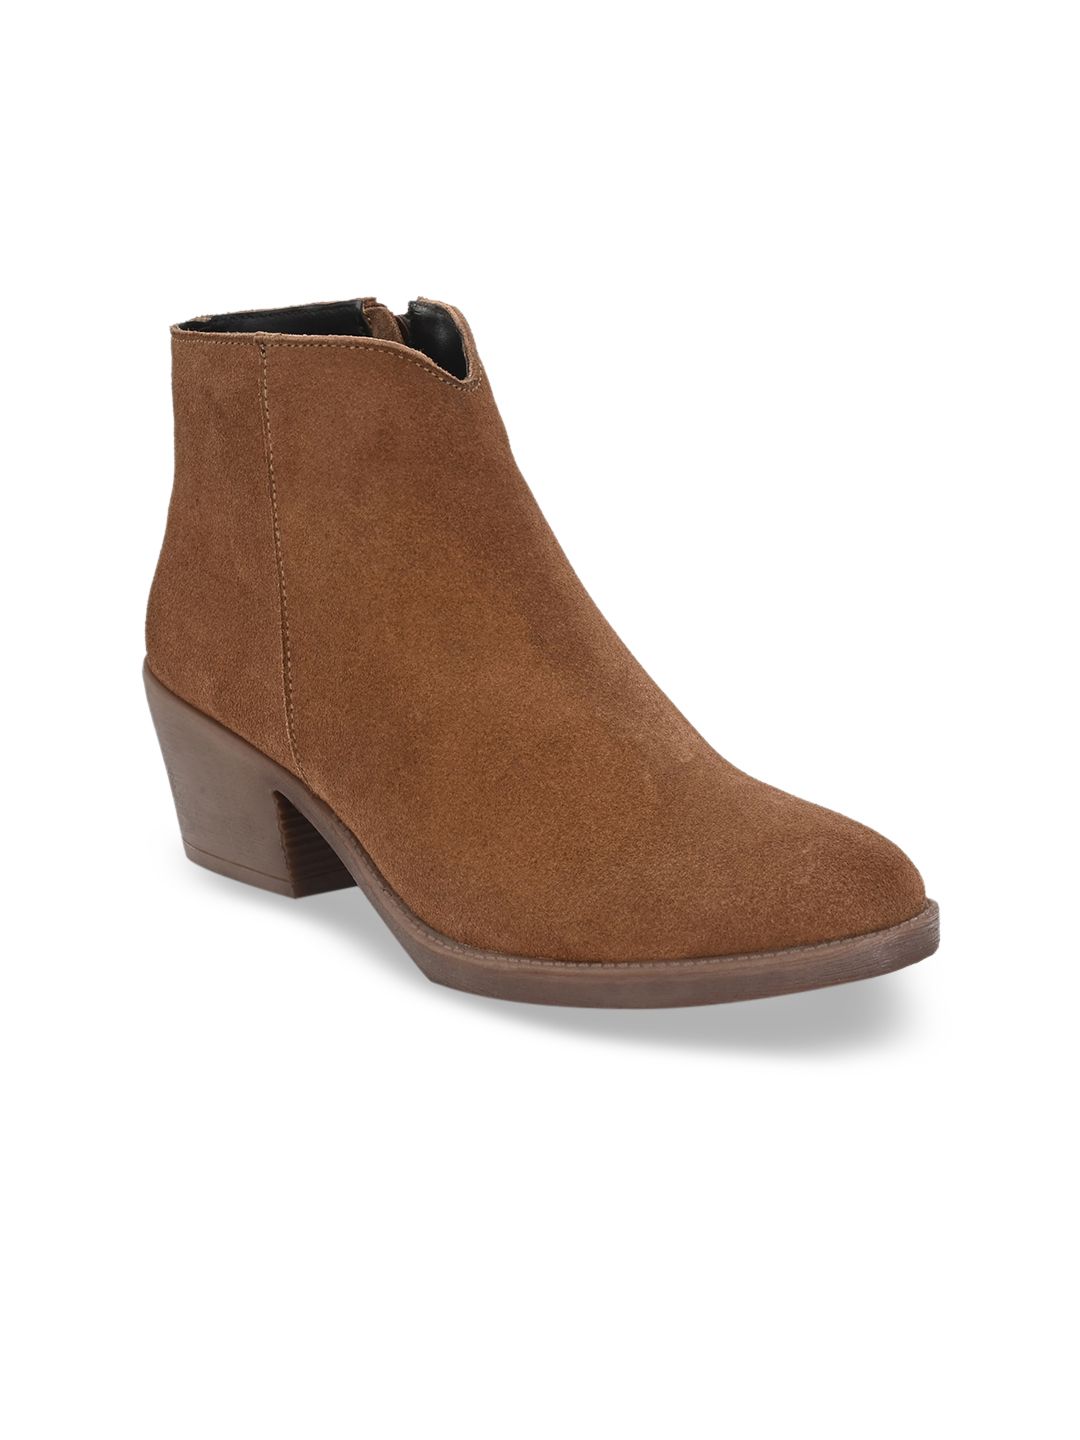 CARLO ROMANO Brown Suede Block Heeled Boots Price in India